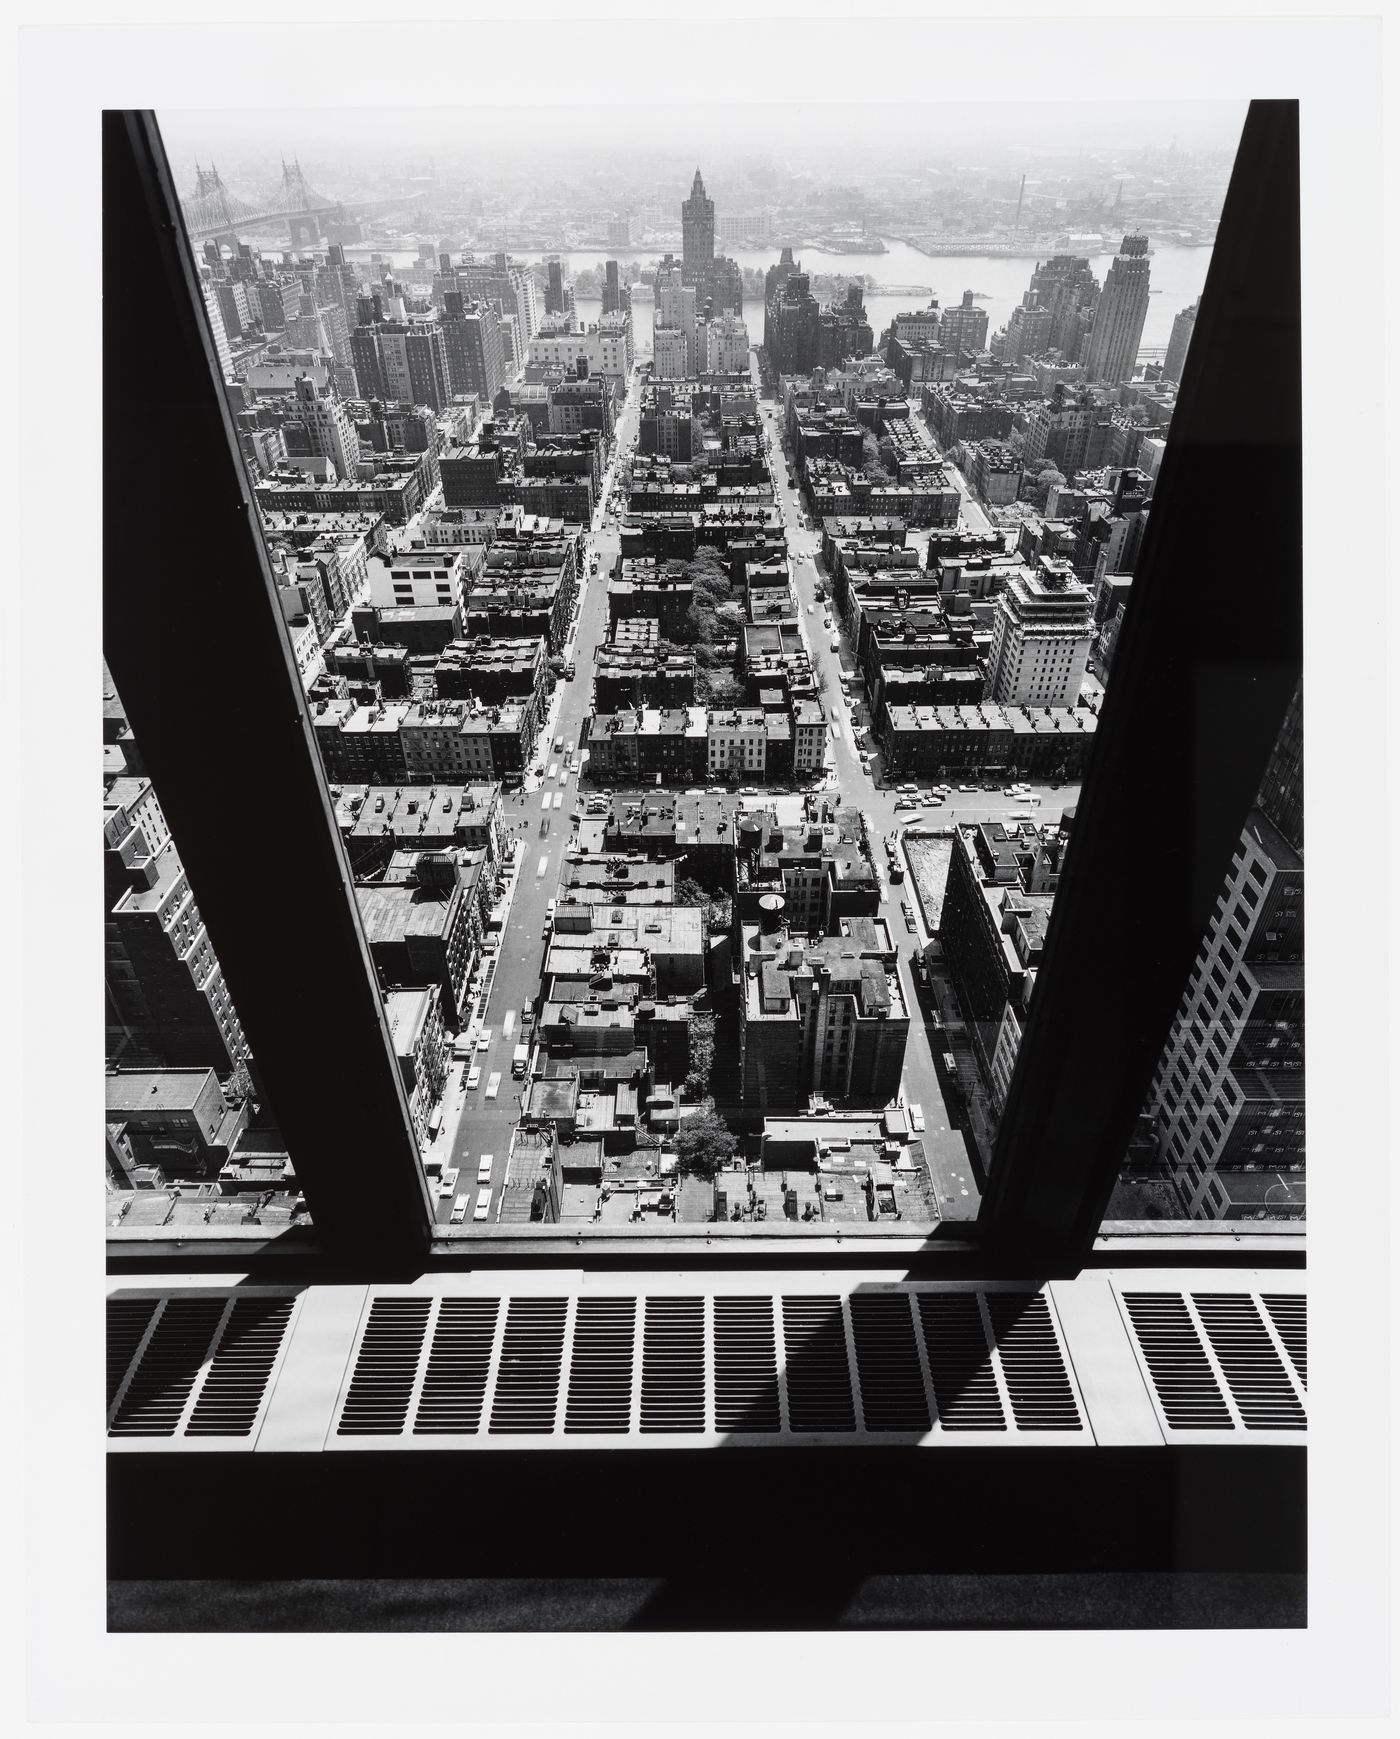 View from the top floor of the Seagram Building showing the surrounding buildings and the East River, New York City